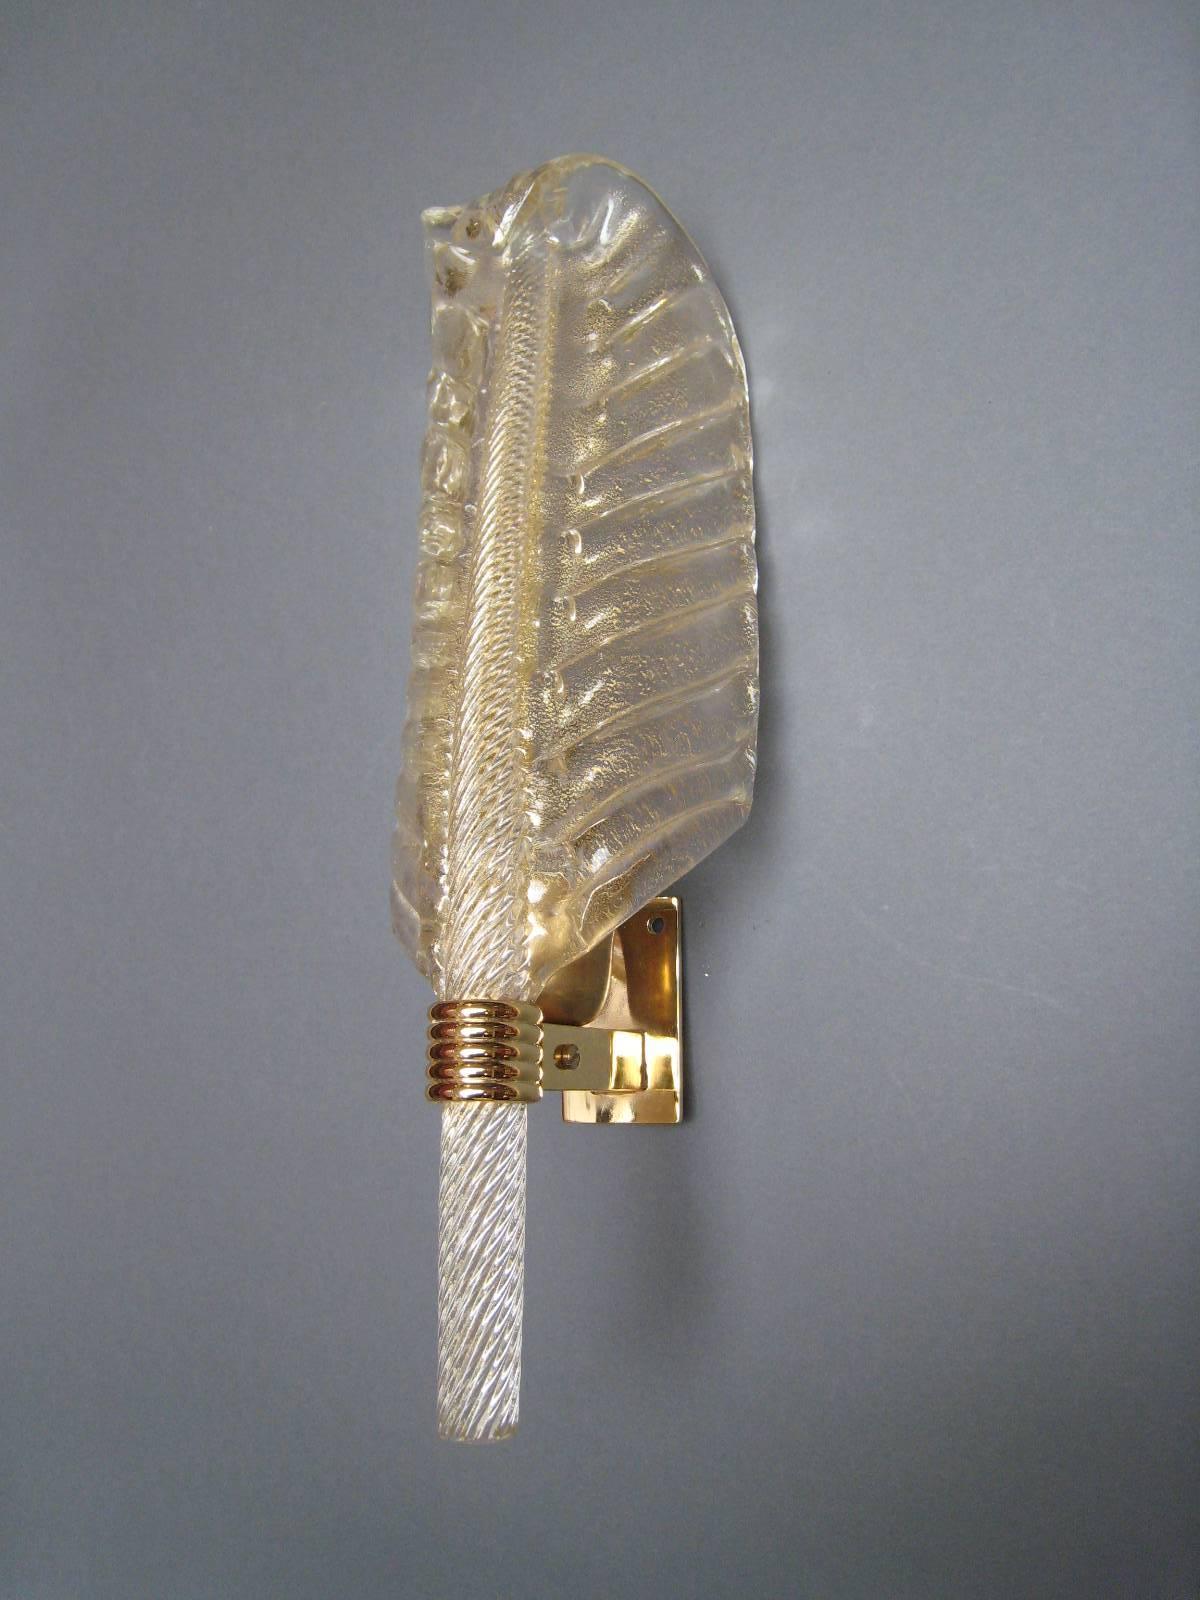 Blown Murano glass with warm gold inside feather shaped , gold brass structure.
Seguso Manufacture.

